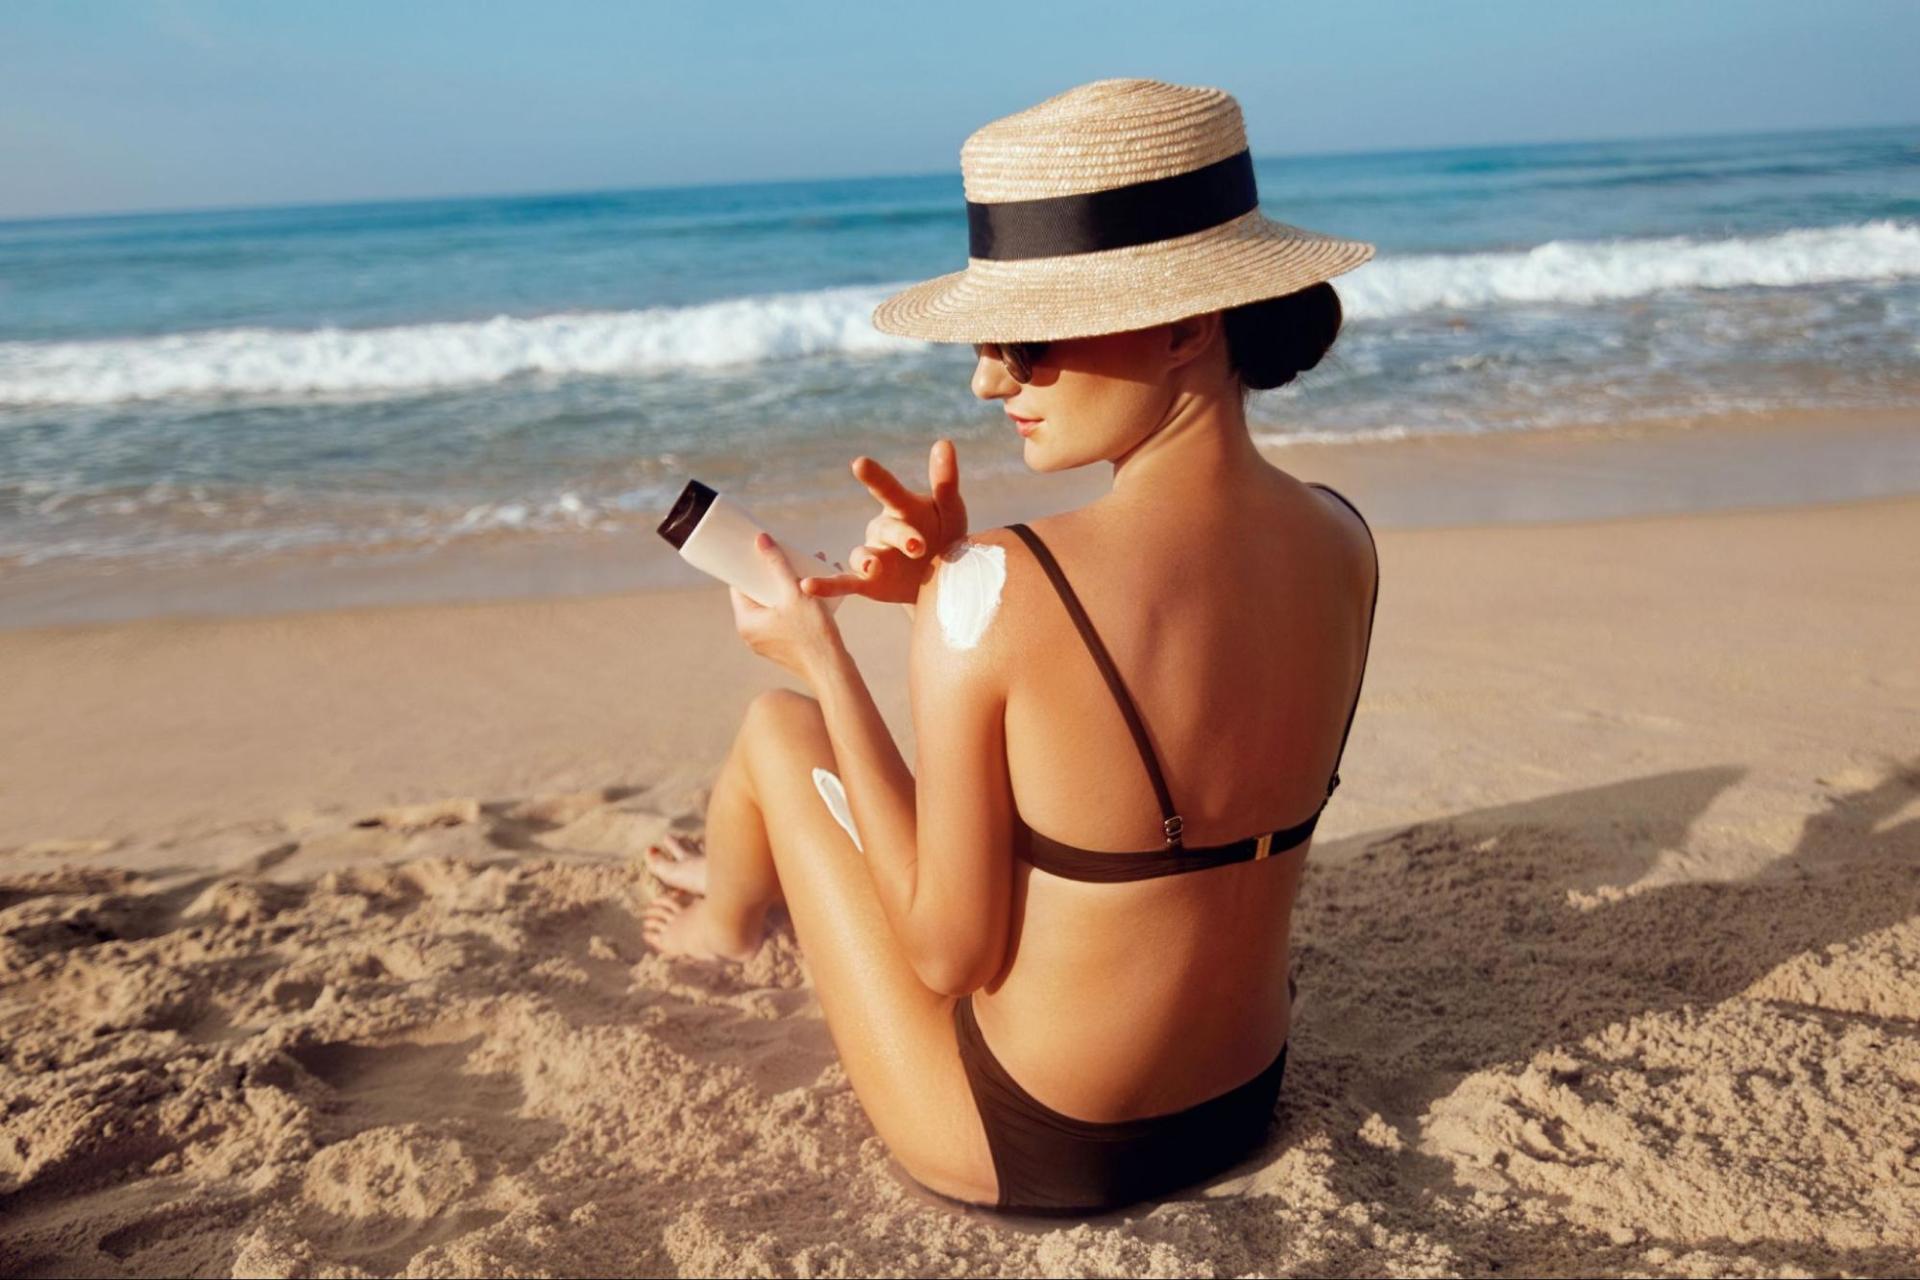 A woman reapplies sunscreen on her shoulder while tanning on the beach